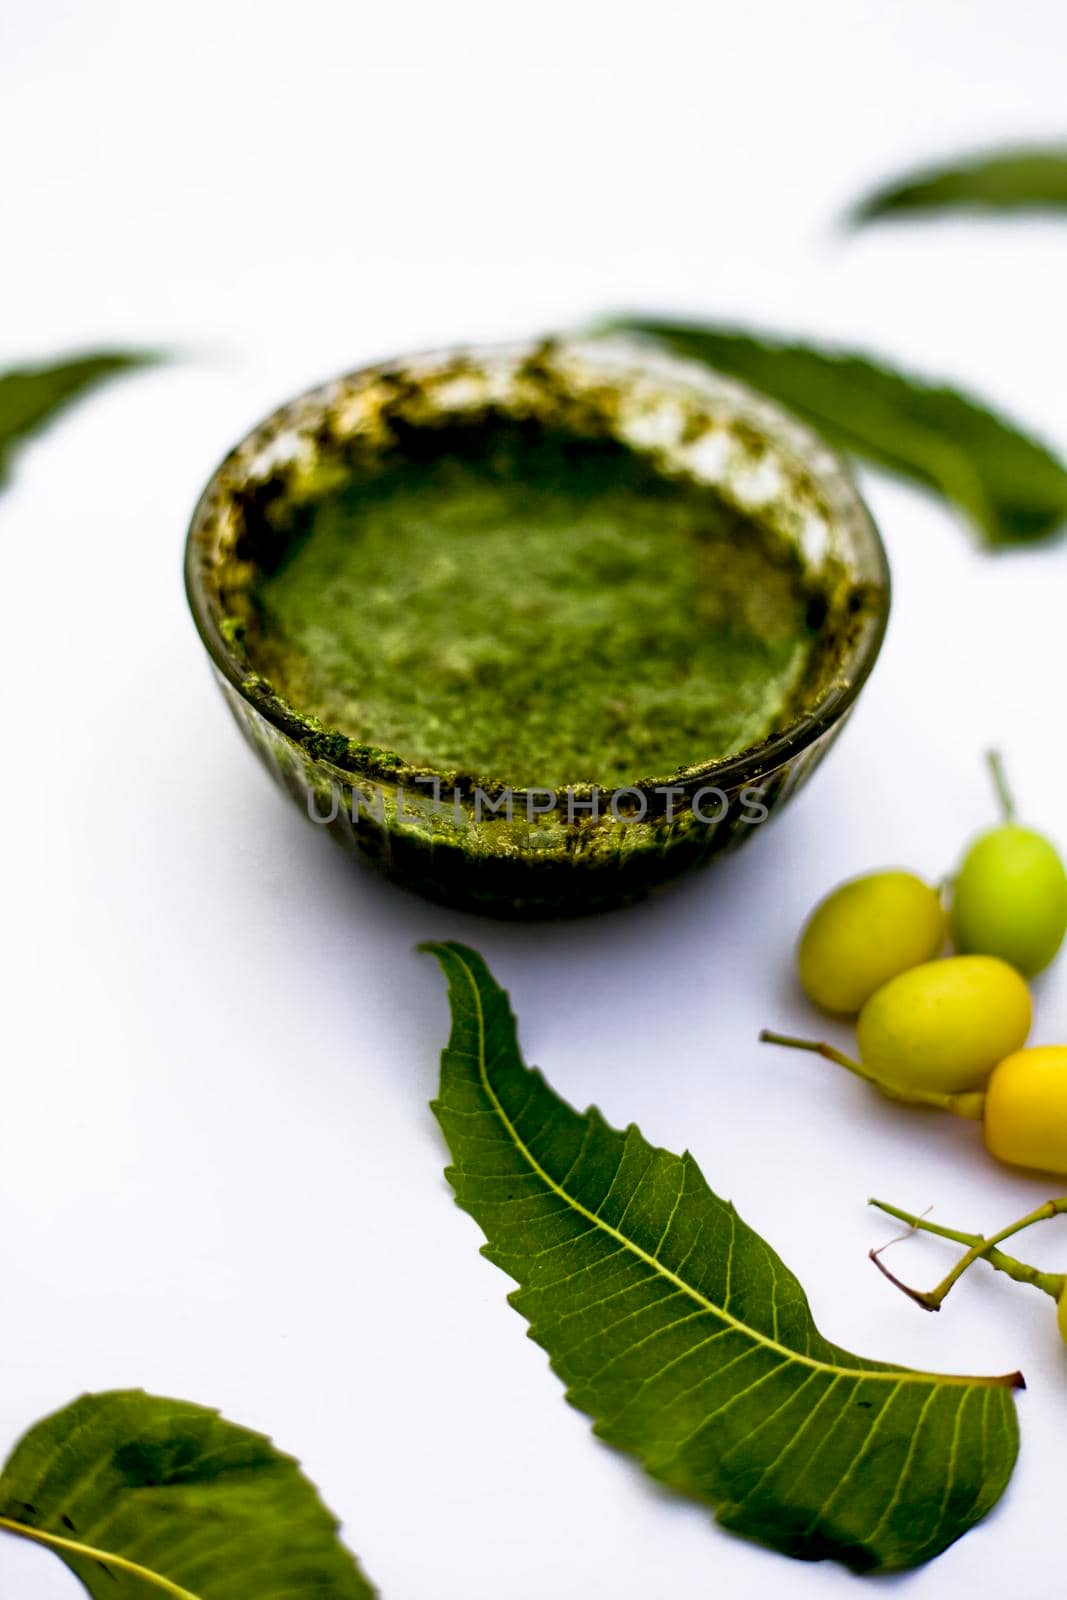 Neem paste or nim paste in a glass bowl isolated on white along with neem fruit in another bowl and some leaves also in it. by mirzamlk